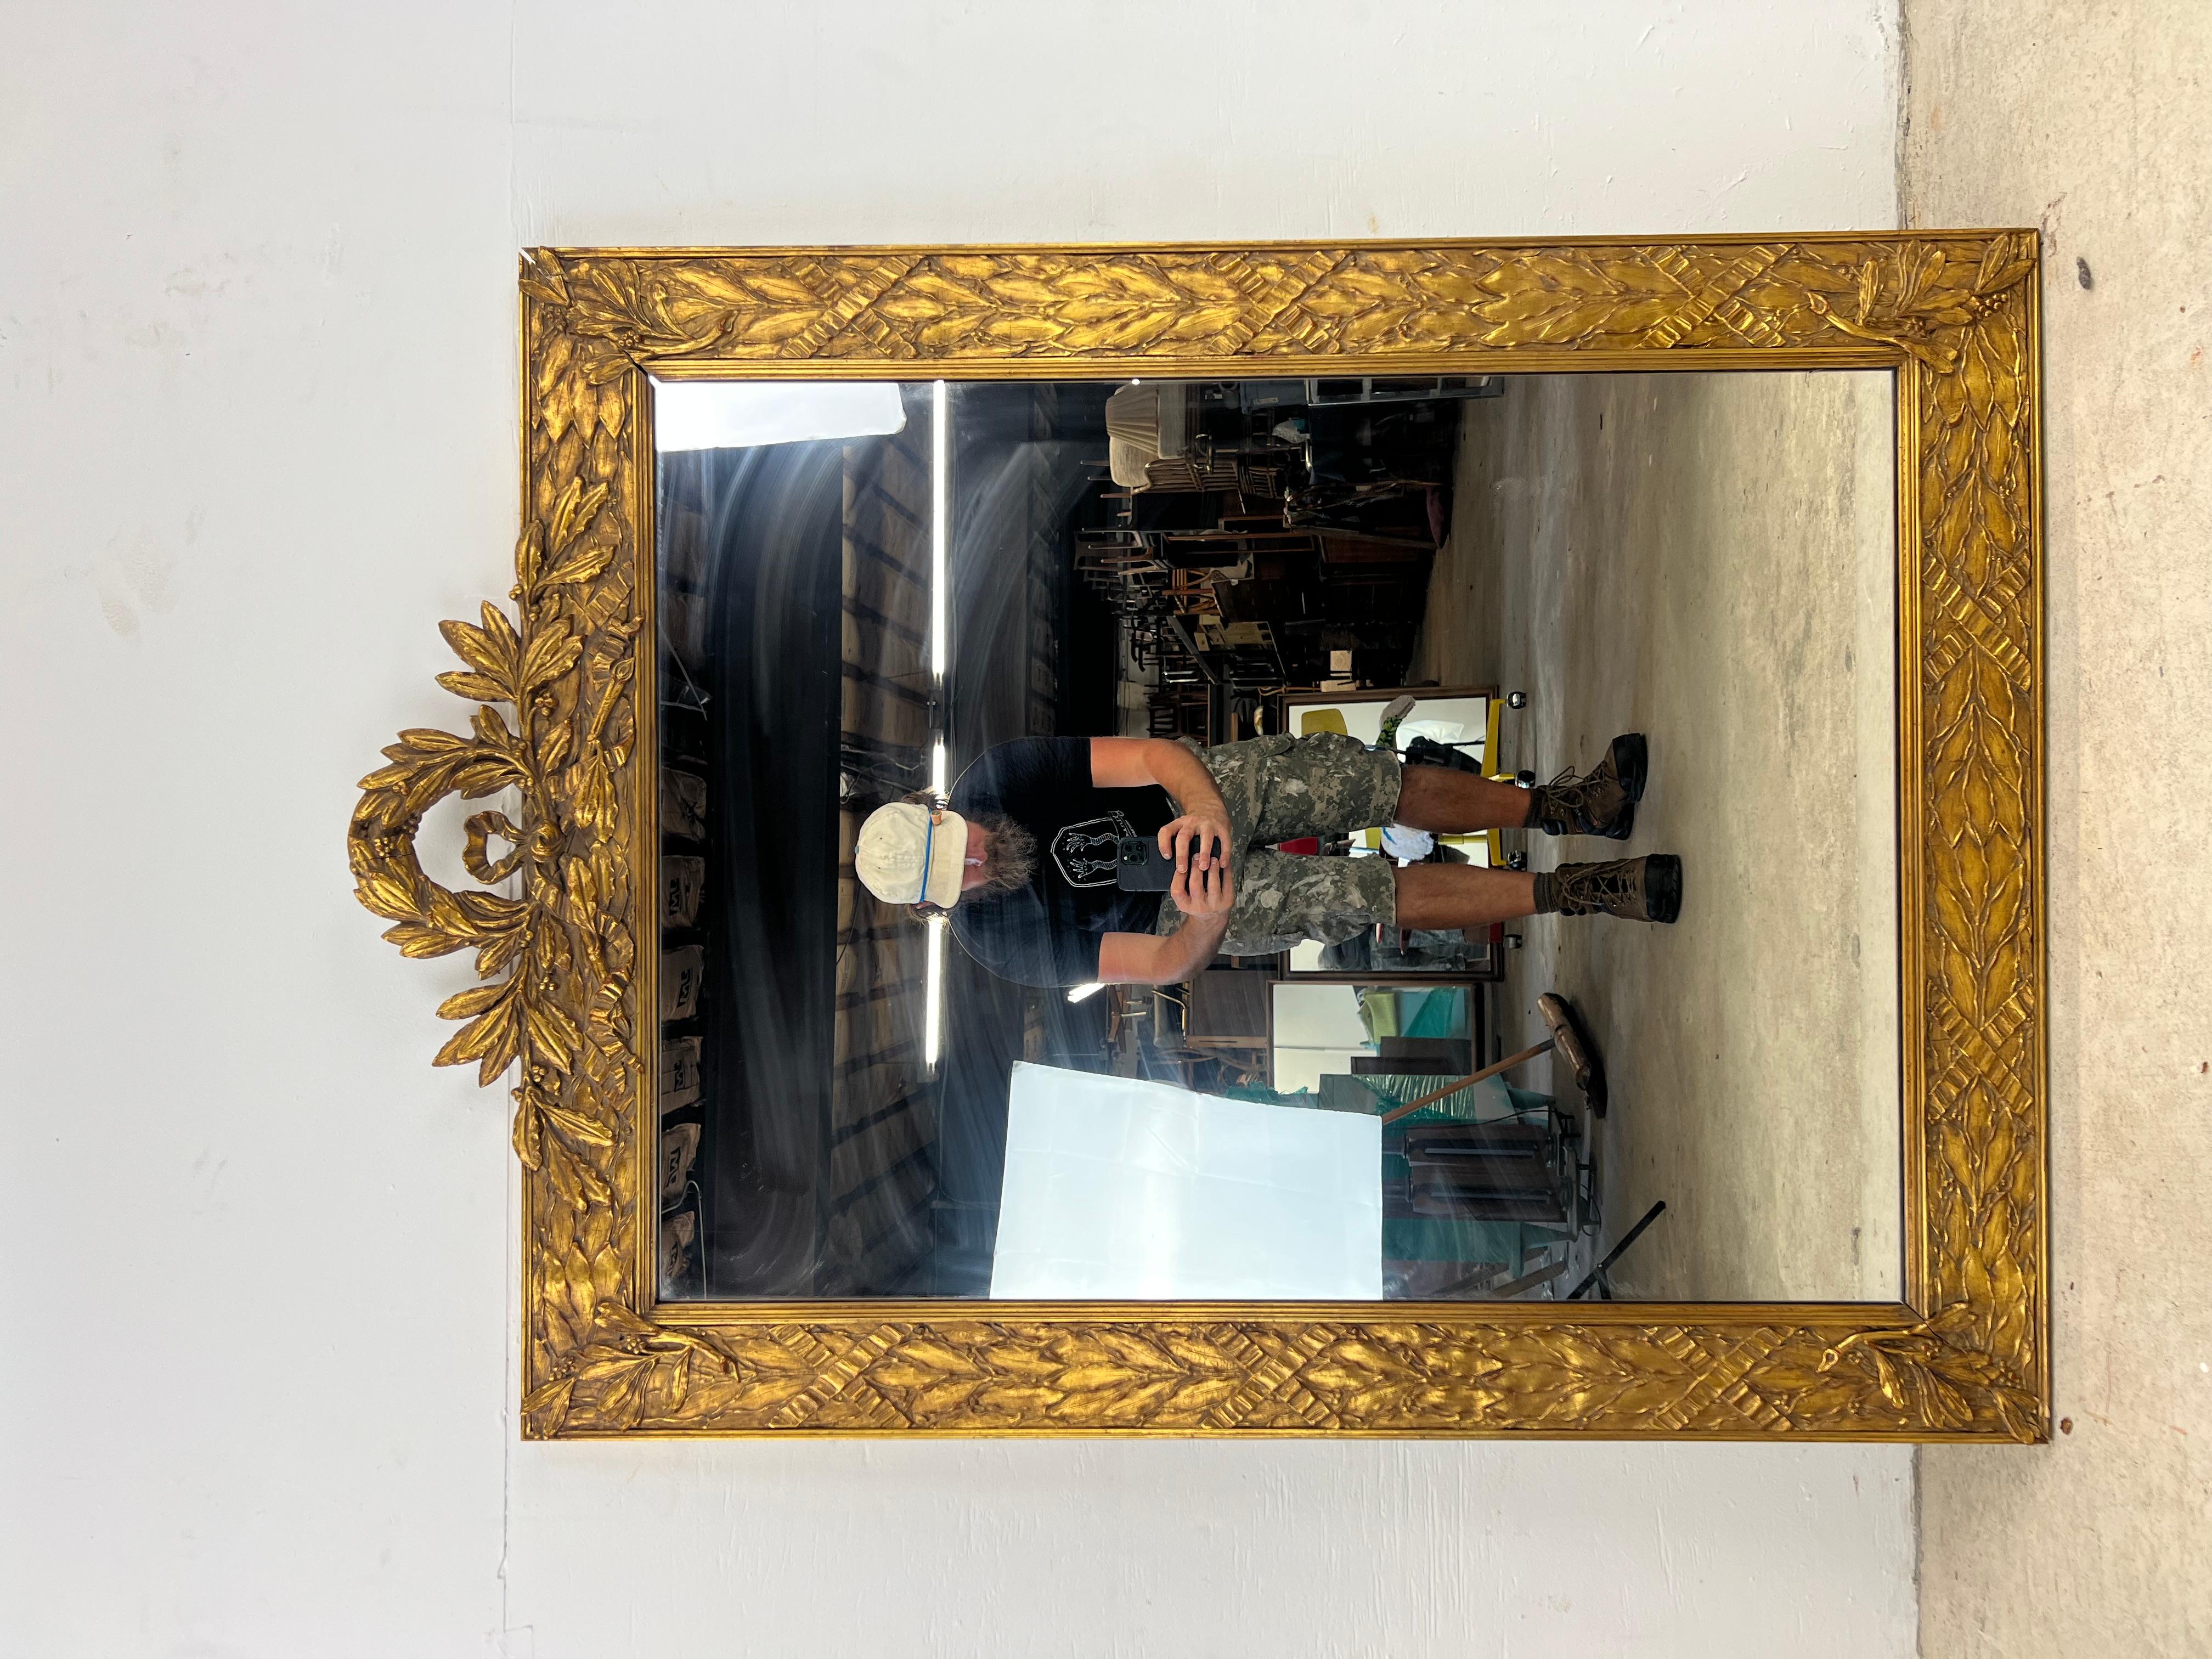 This mid century modern wall mirror by Drexel features hardwood frame with unique carved detailing, vintage mirrored glass, and piano wire for hanging.

Matching lowboy dresser and highboy dresser available separately. 

 Dimensions: 44.5w 1.75d